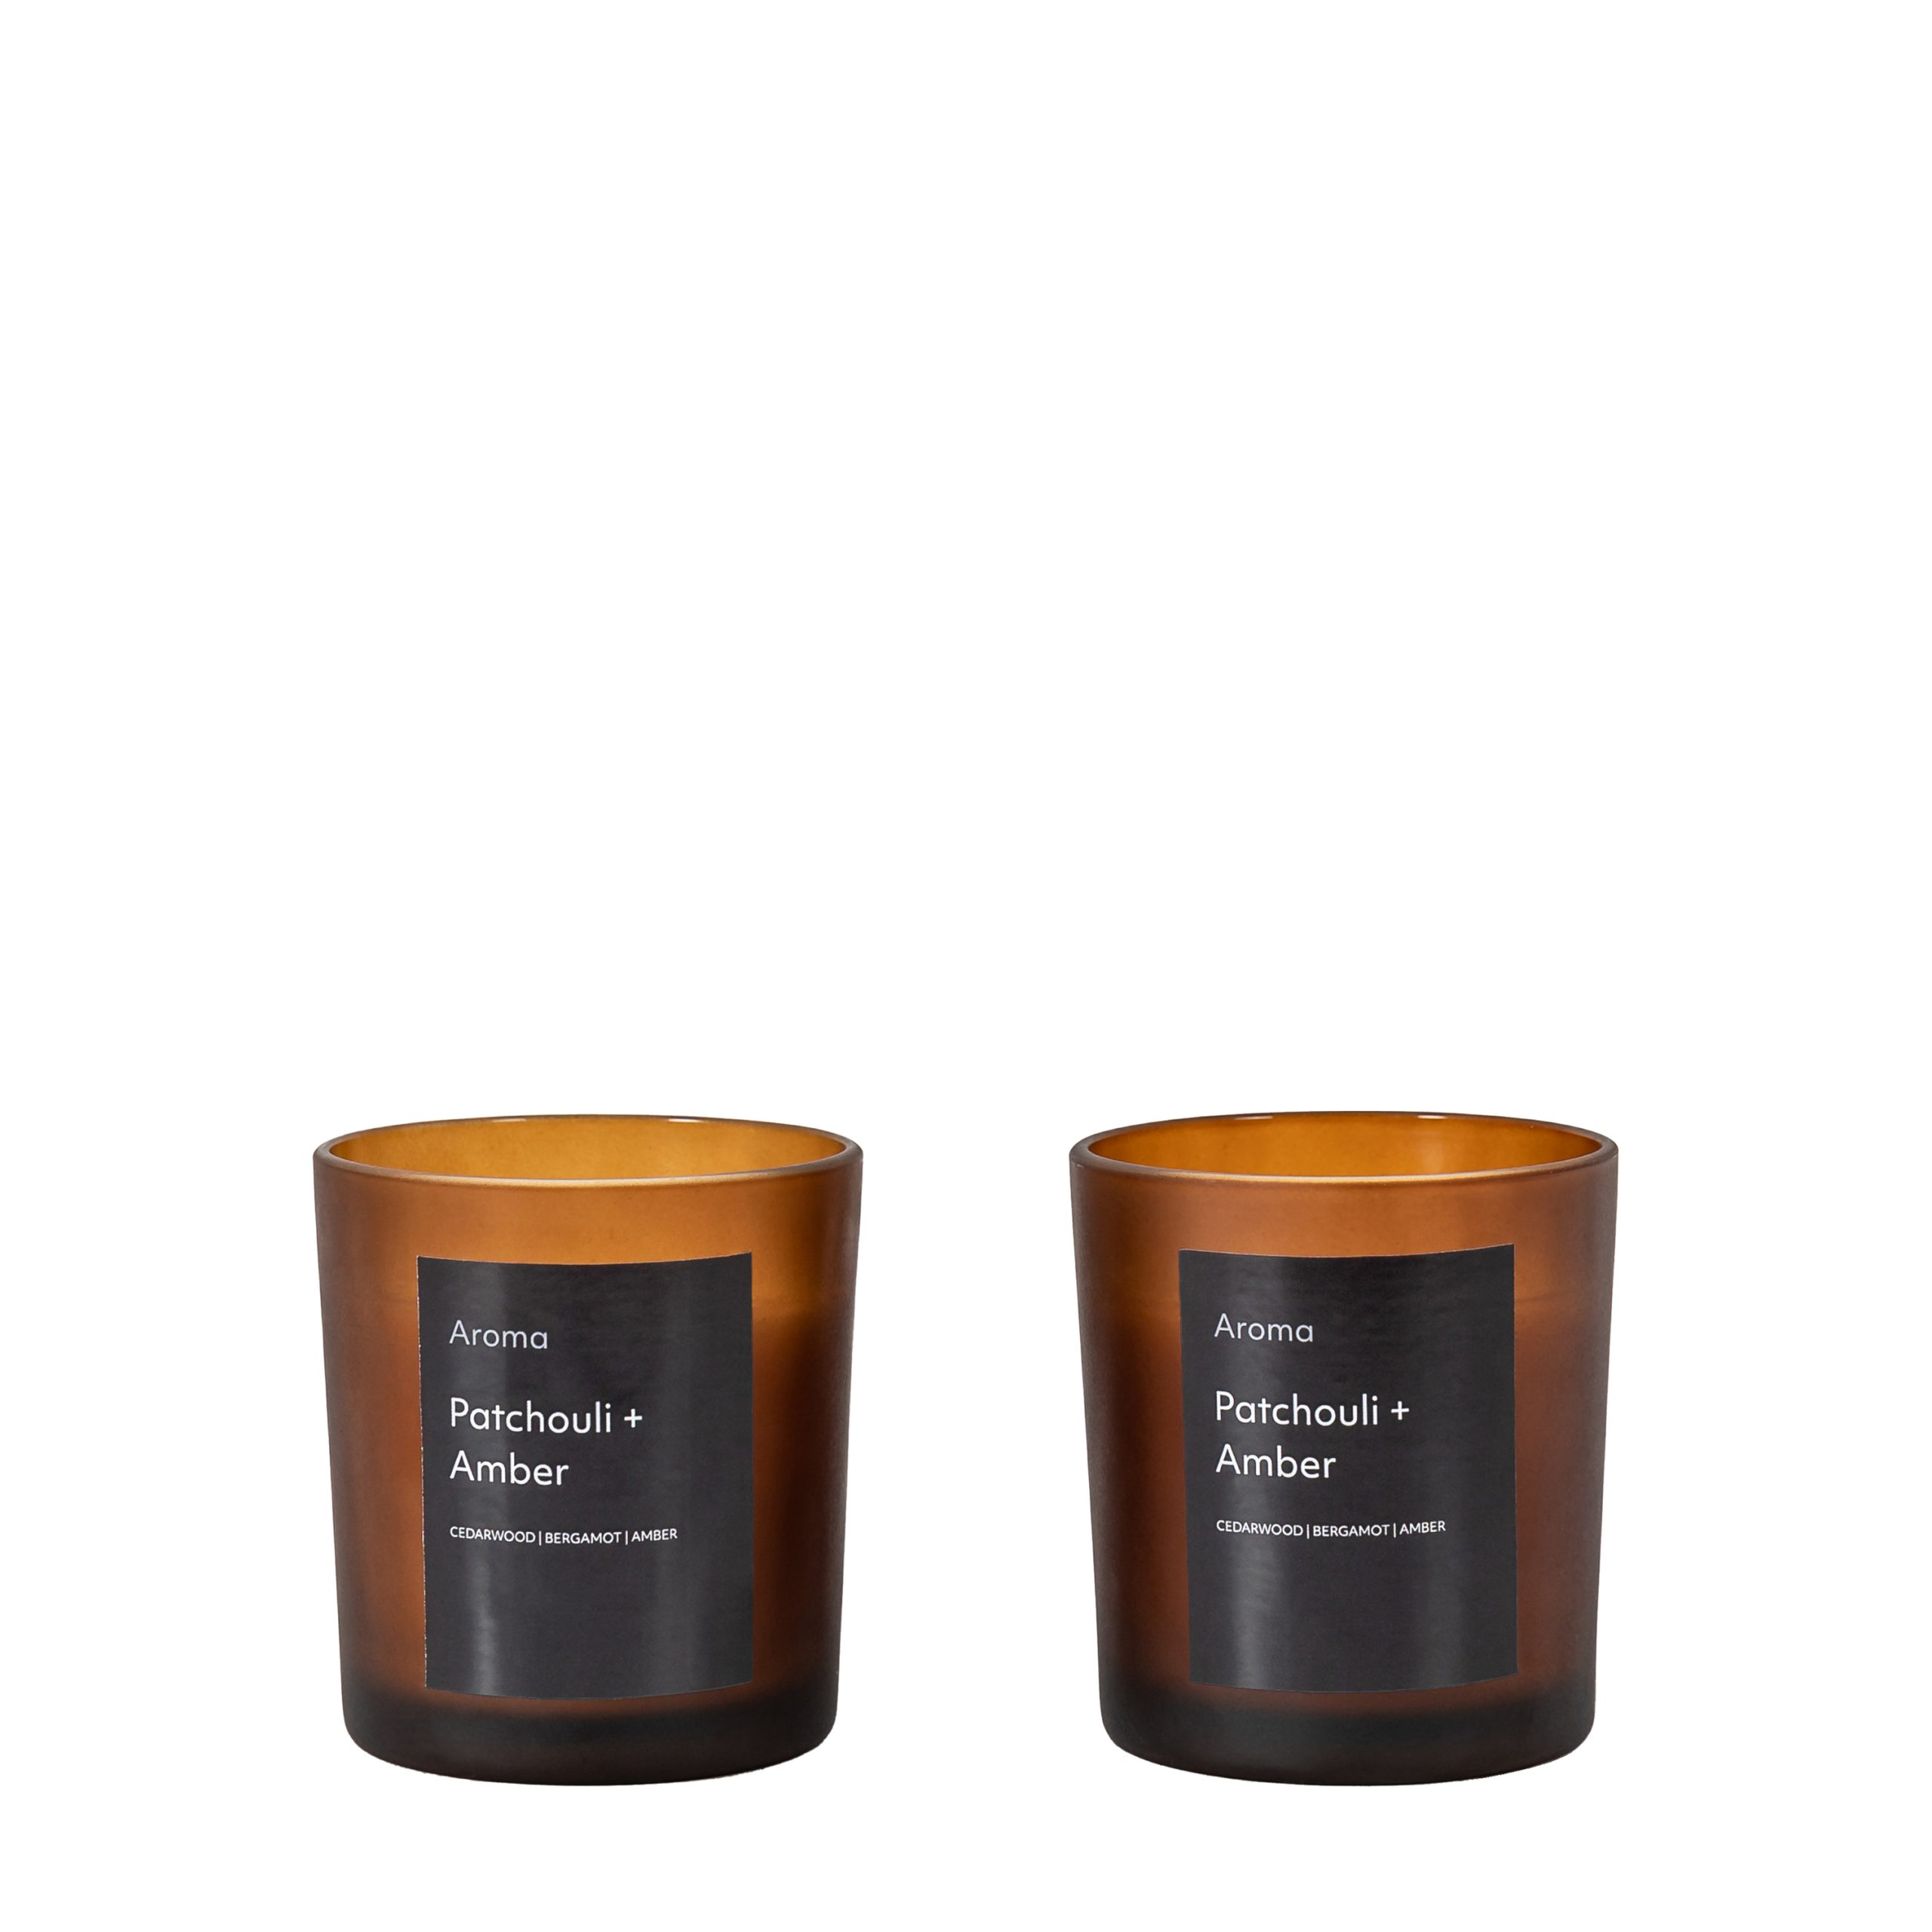 Gallery Direct Aroma Votive Patchouli & Amber (Pack of 2)